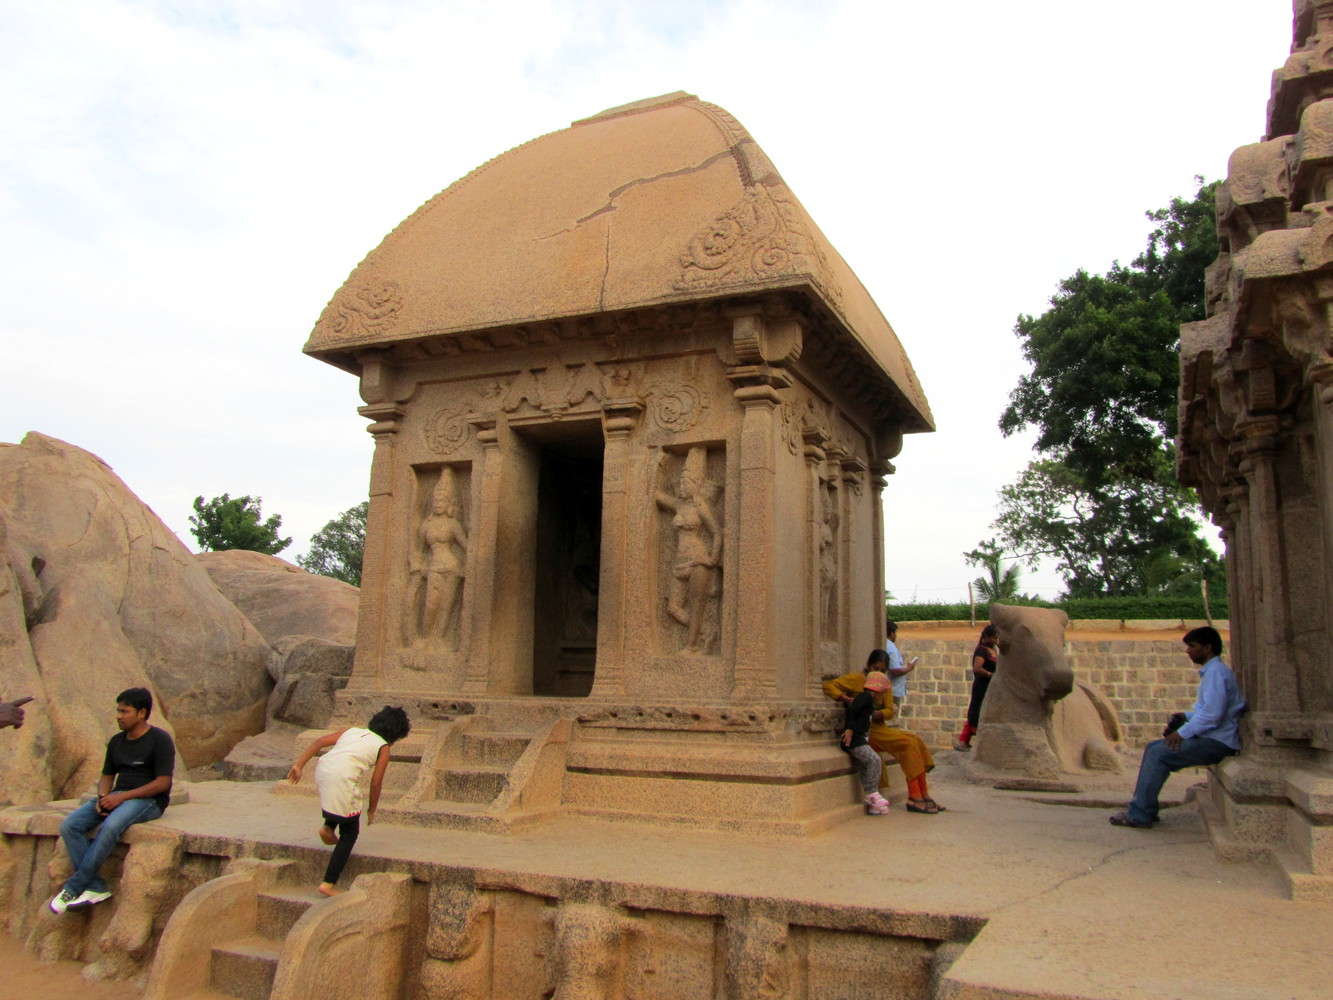 A monolithic granite monument known as Draupadi Ratha that resembles a village hut with thatched roof